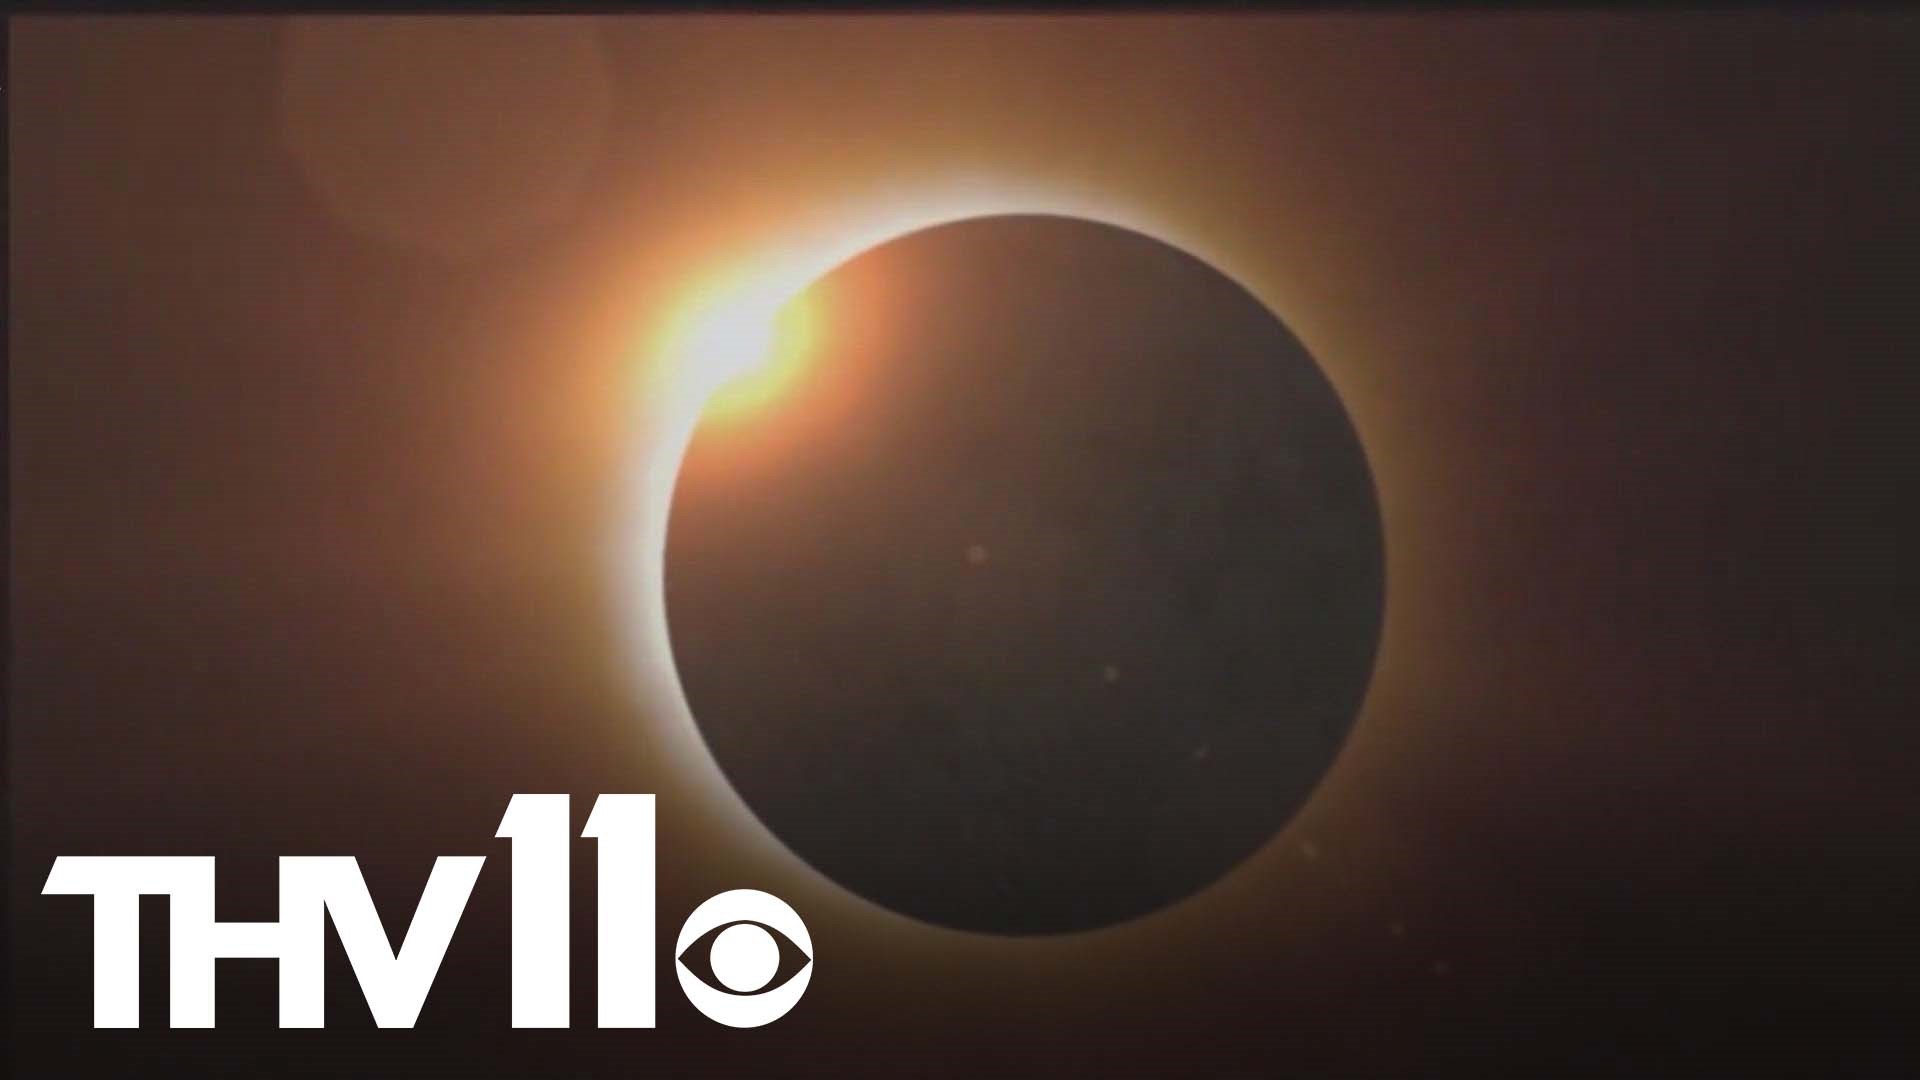 As residents of the Natural State prepare for the total eclipse, school districts across the state will be canceling classes for the day on April 8, 2024.